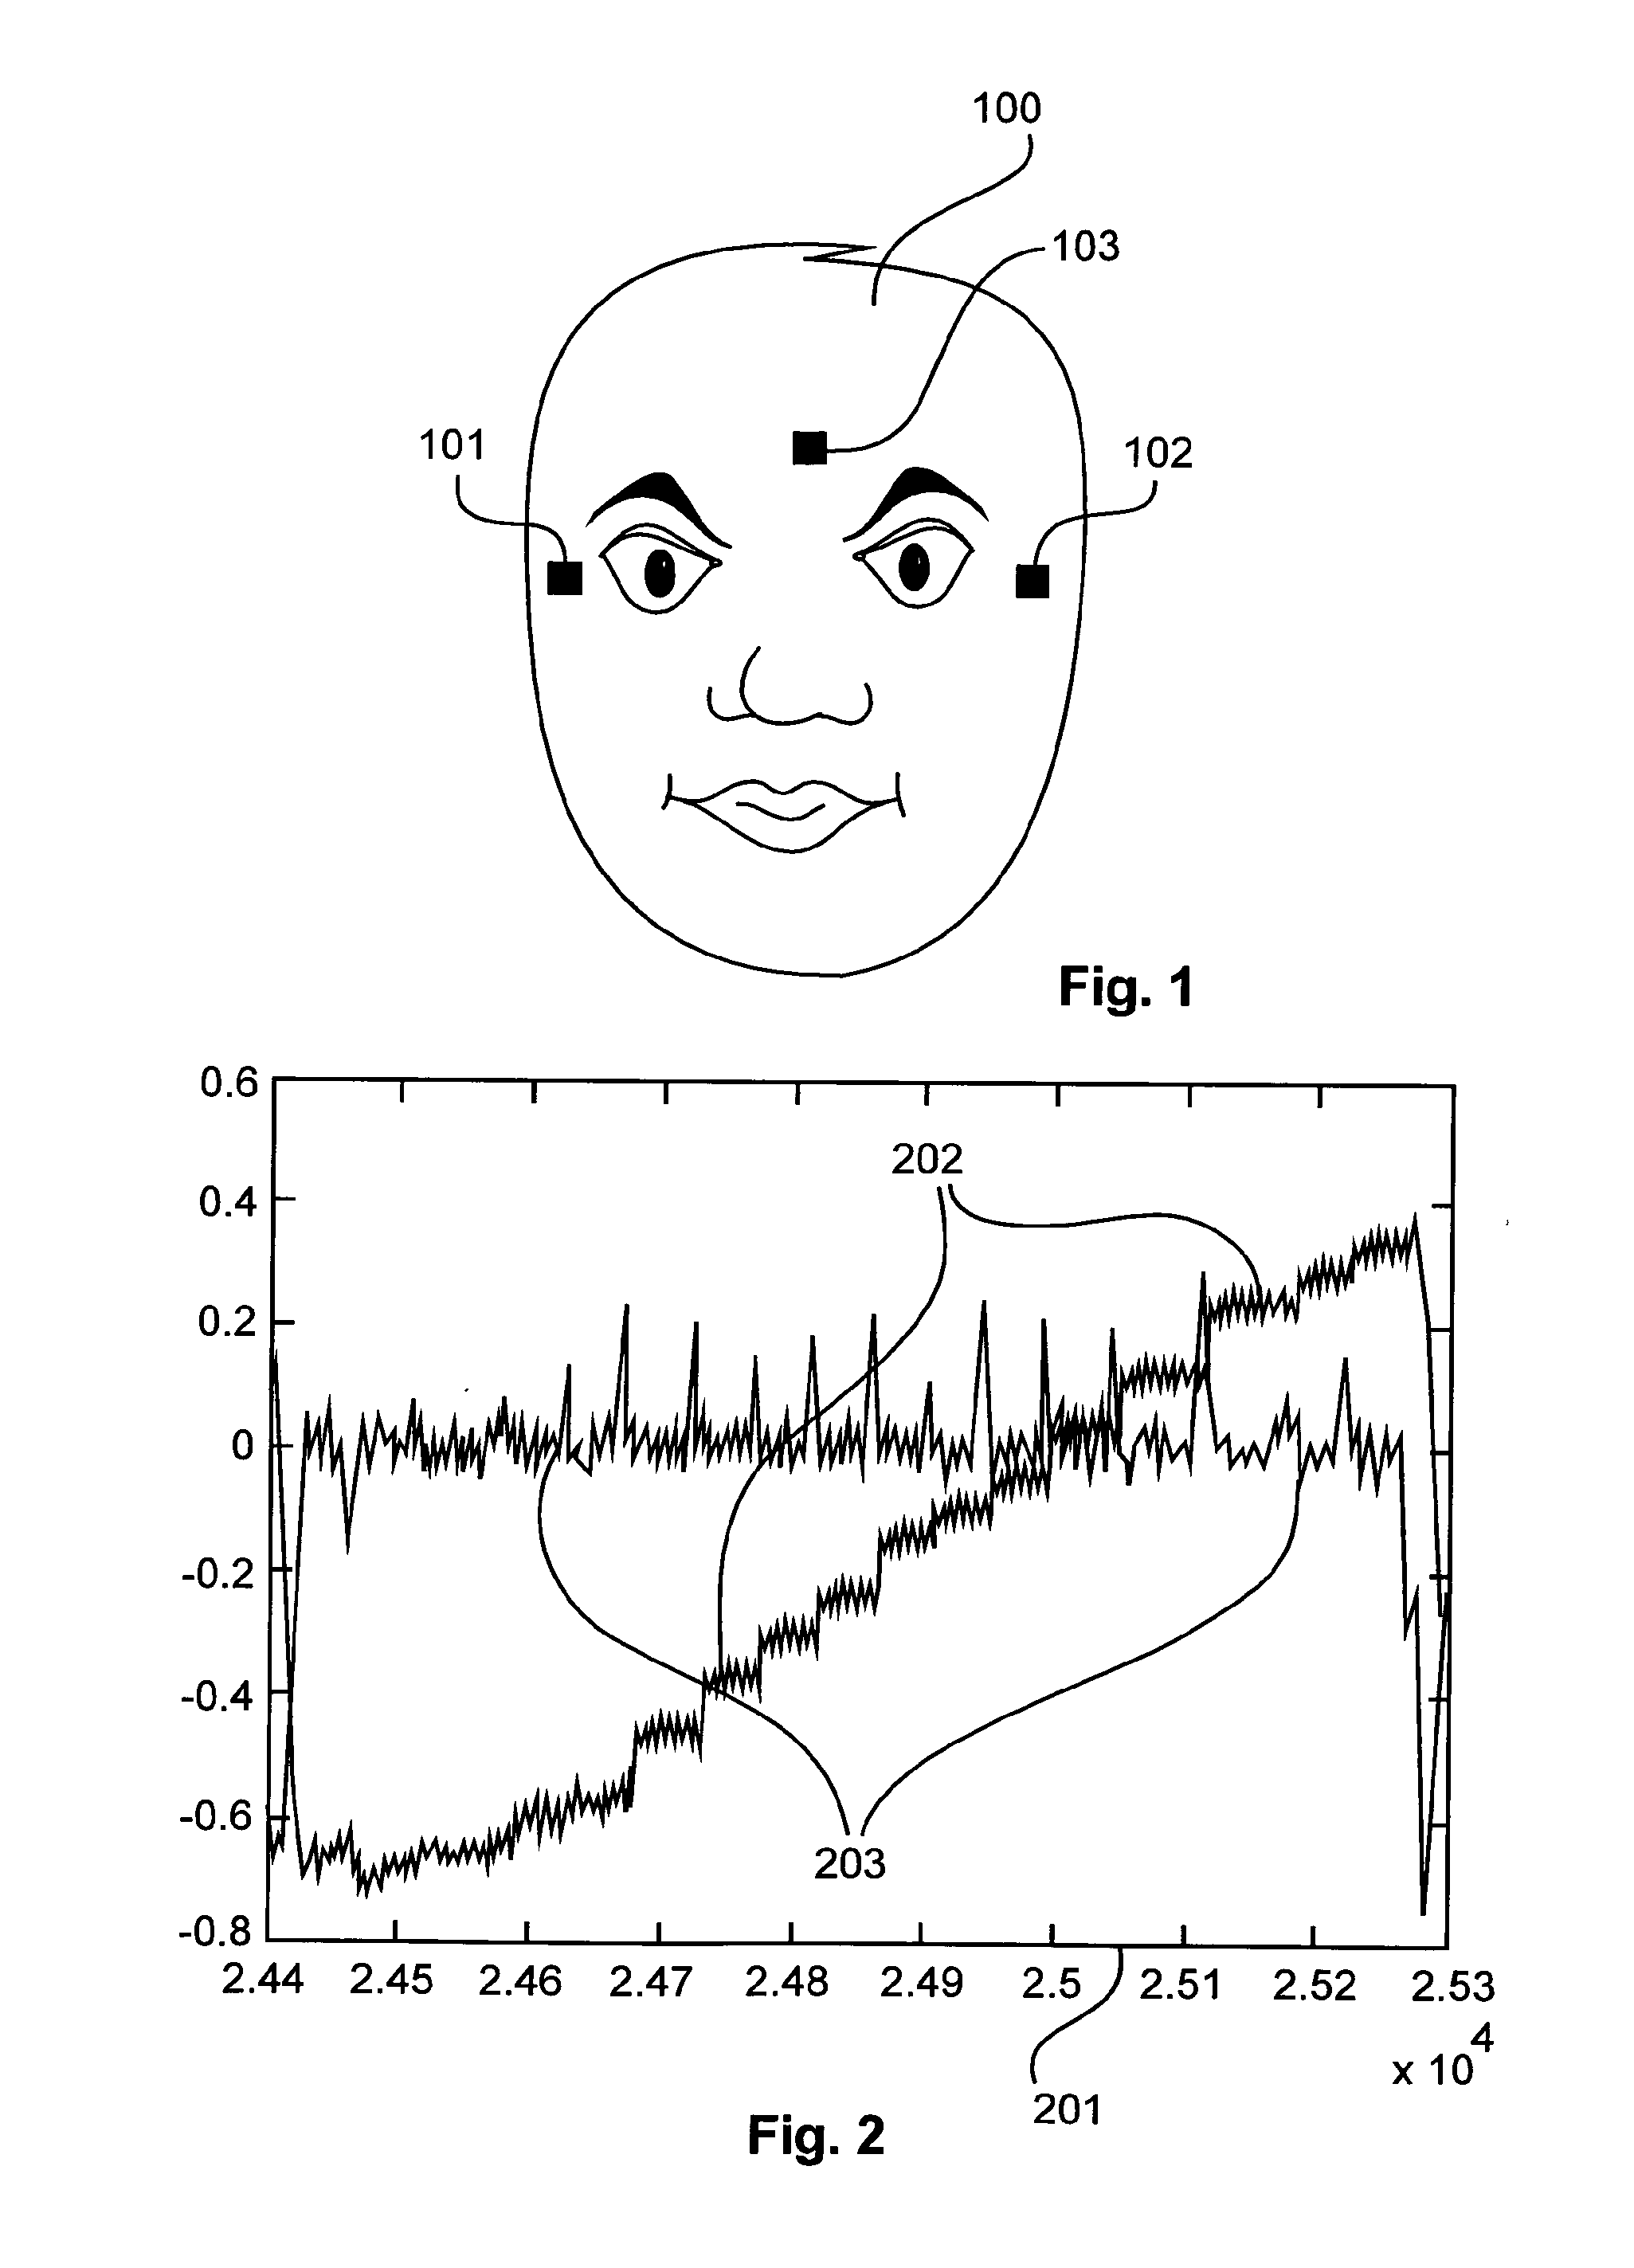 Method for gaze-controlled text size control, and methods for gaze-based measuring of a text reading speed and of a number of visual saccades per text line